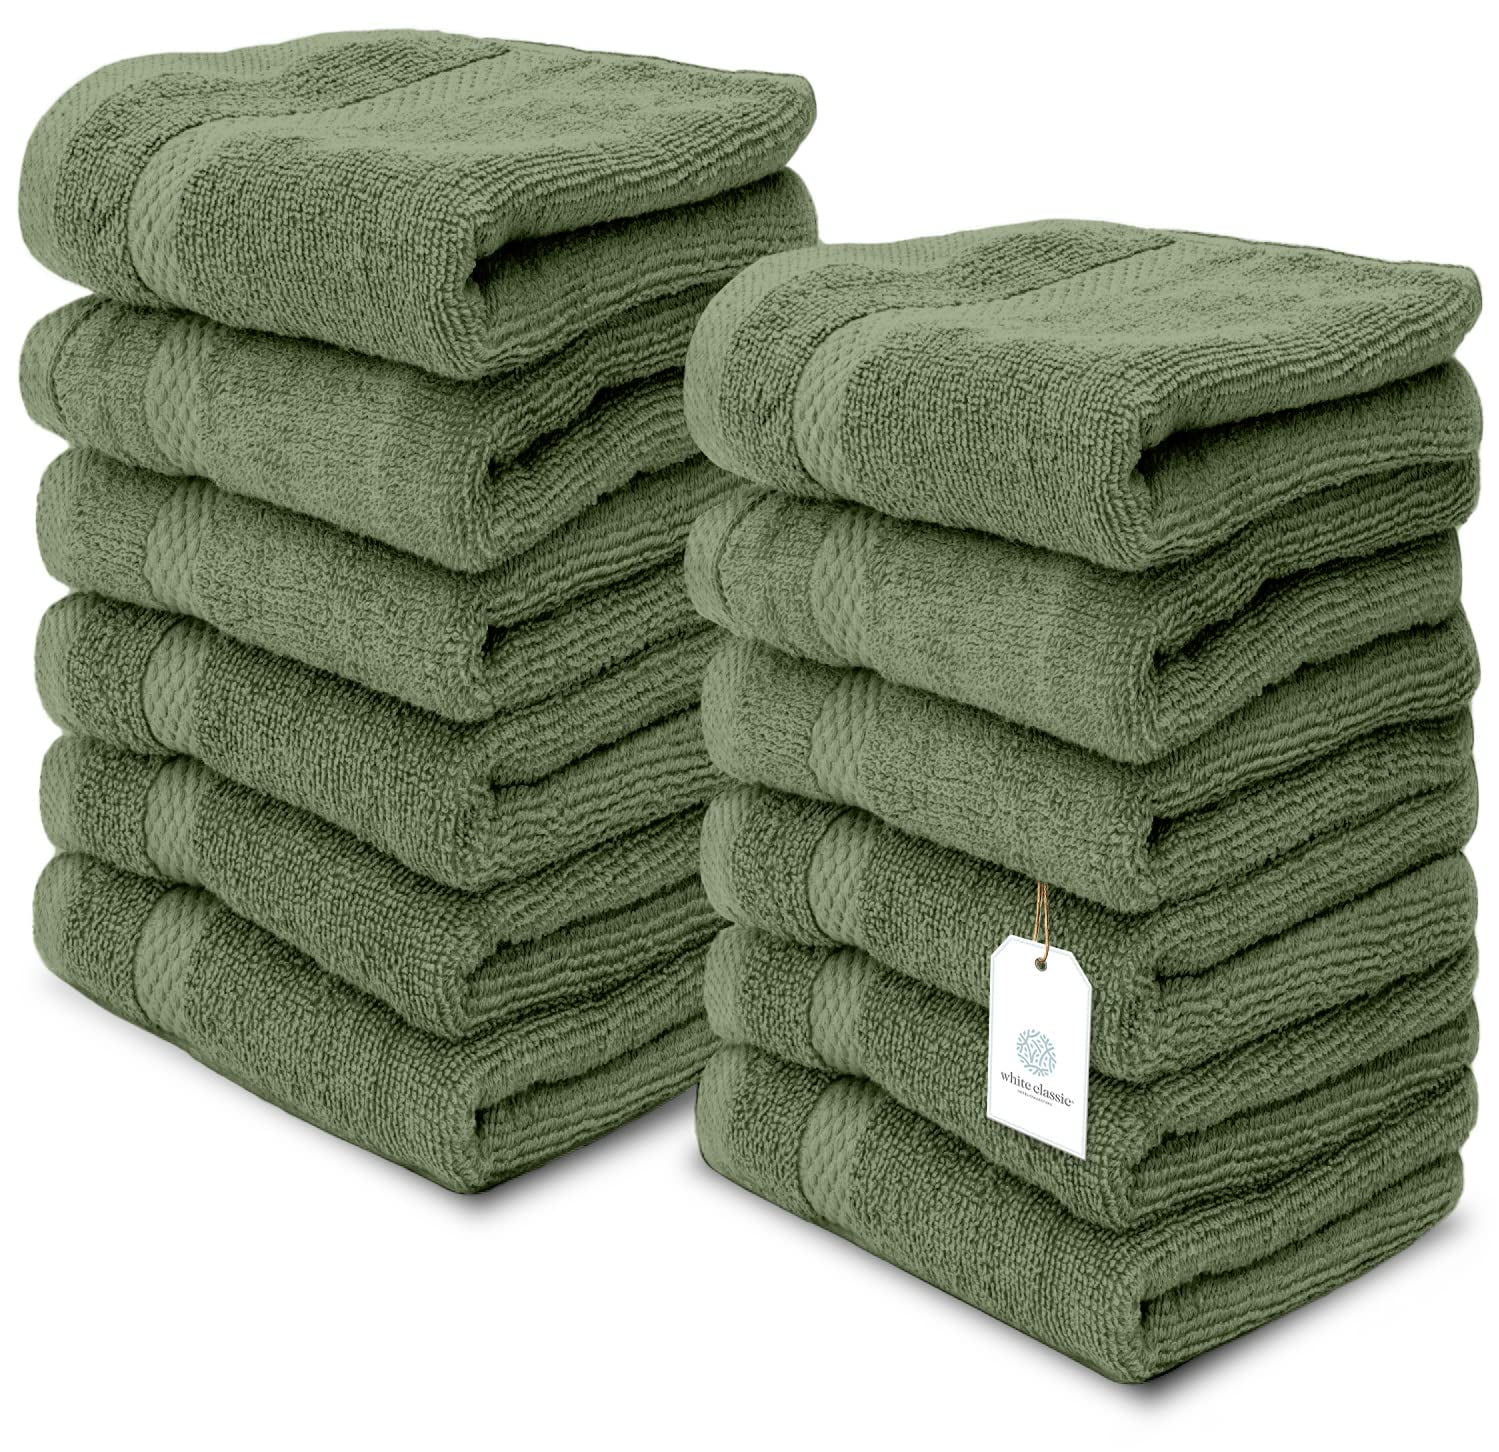 GetUSCart- Utopia Towels Cotton Washcloths Set - 100% Ring Spun Cotton,  Premium Quality Flannel Face Cloths, Highly Absorbent and Soft Feel  Fingertip Towels (60 Pack, Sage Green)